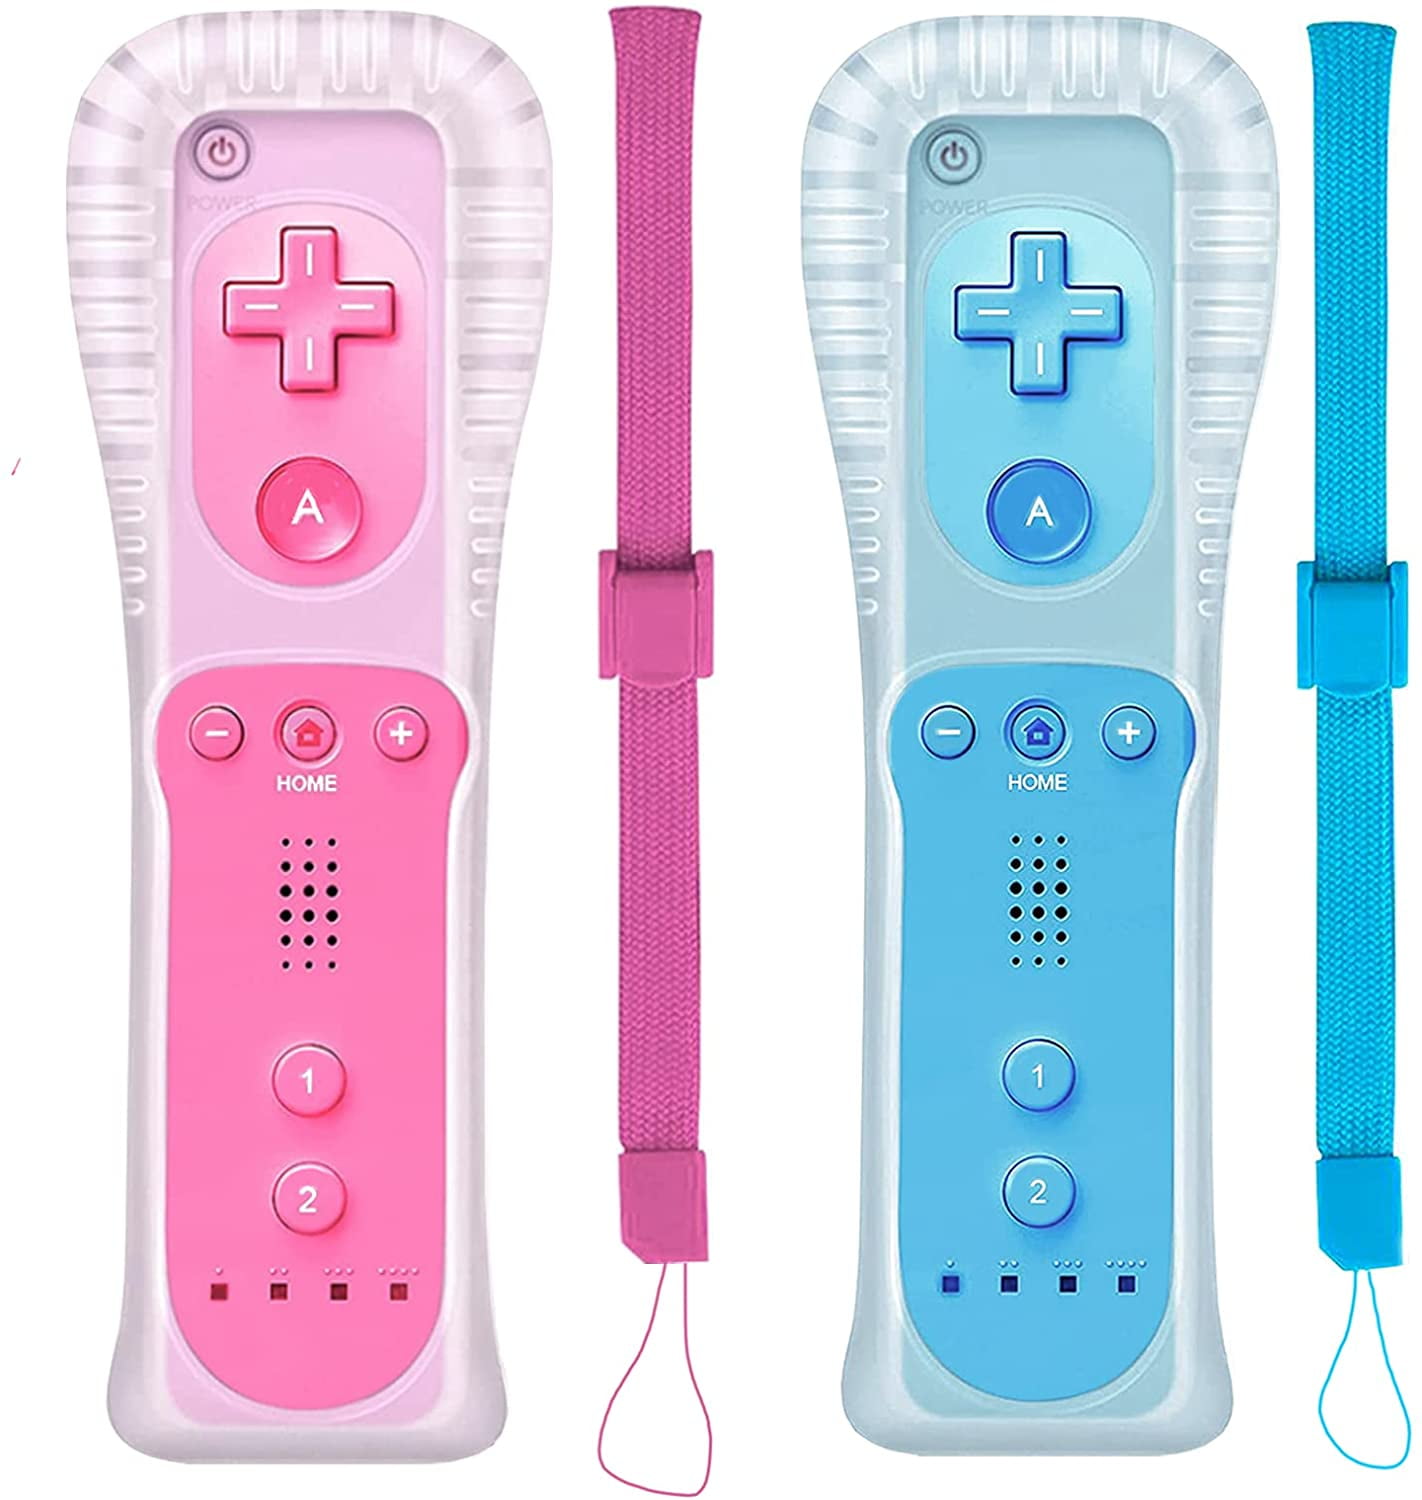 Diakritisch Document Zo snel als een flits 2 Packs Classic Remote Controller Compatible for Wii Wii U Console, Gamepad  with Soft Silicone Sleeve and Wrist Strap (Pink and Blue) - Walmart.com